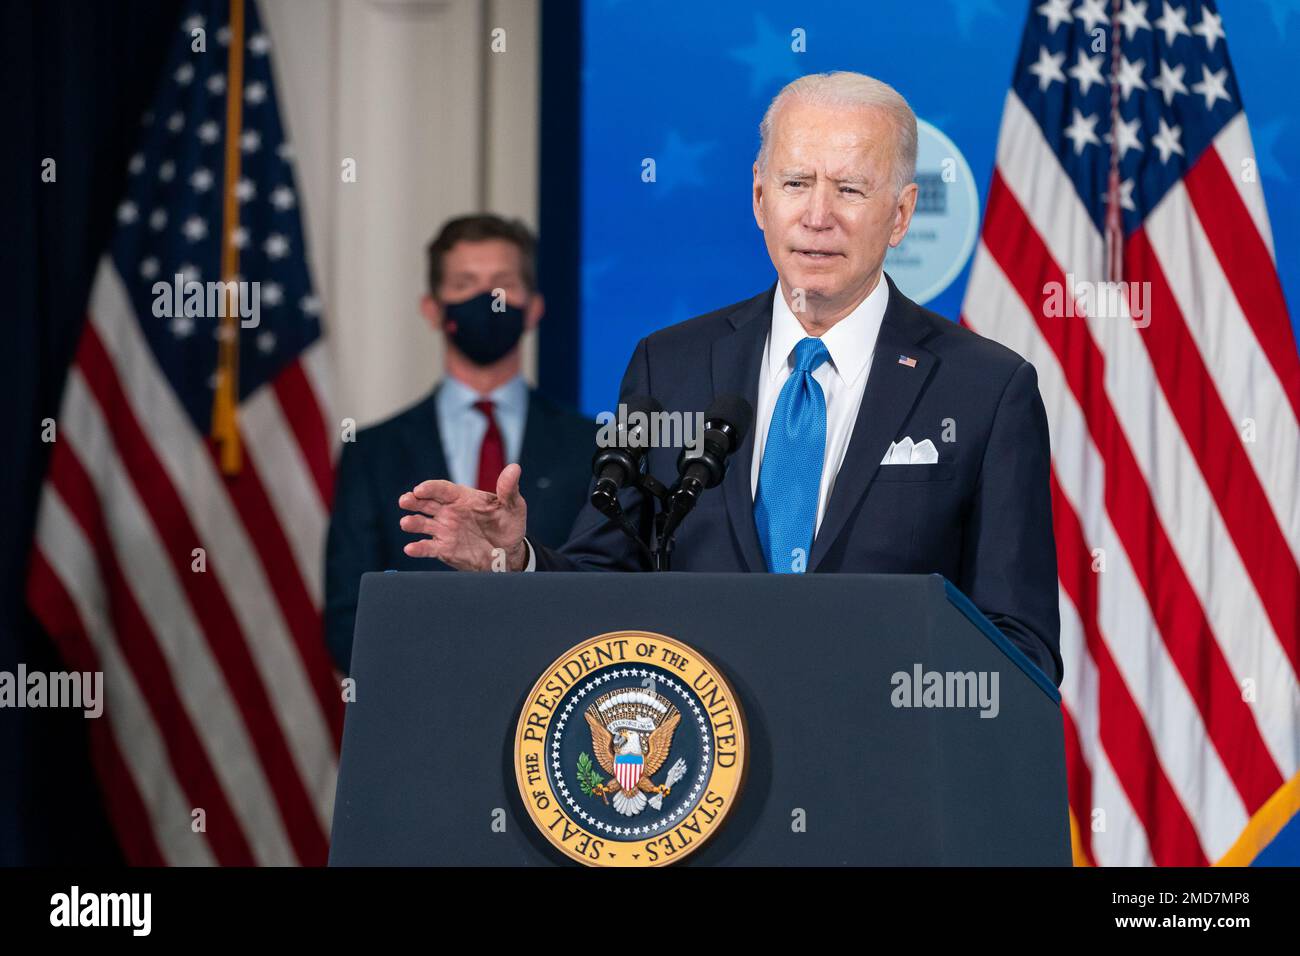 Reportage: Johnson & Johnson CEO Alex Gorsky looks on as President Joe Biden delivers remarks on COVID-19 vaccine production Wednesday, March 10, 2021, in the South Court Auditorium in the Eisenhower Executive Office Building Stock Photo